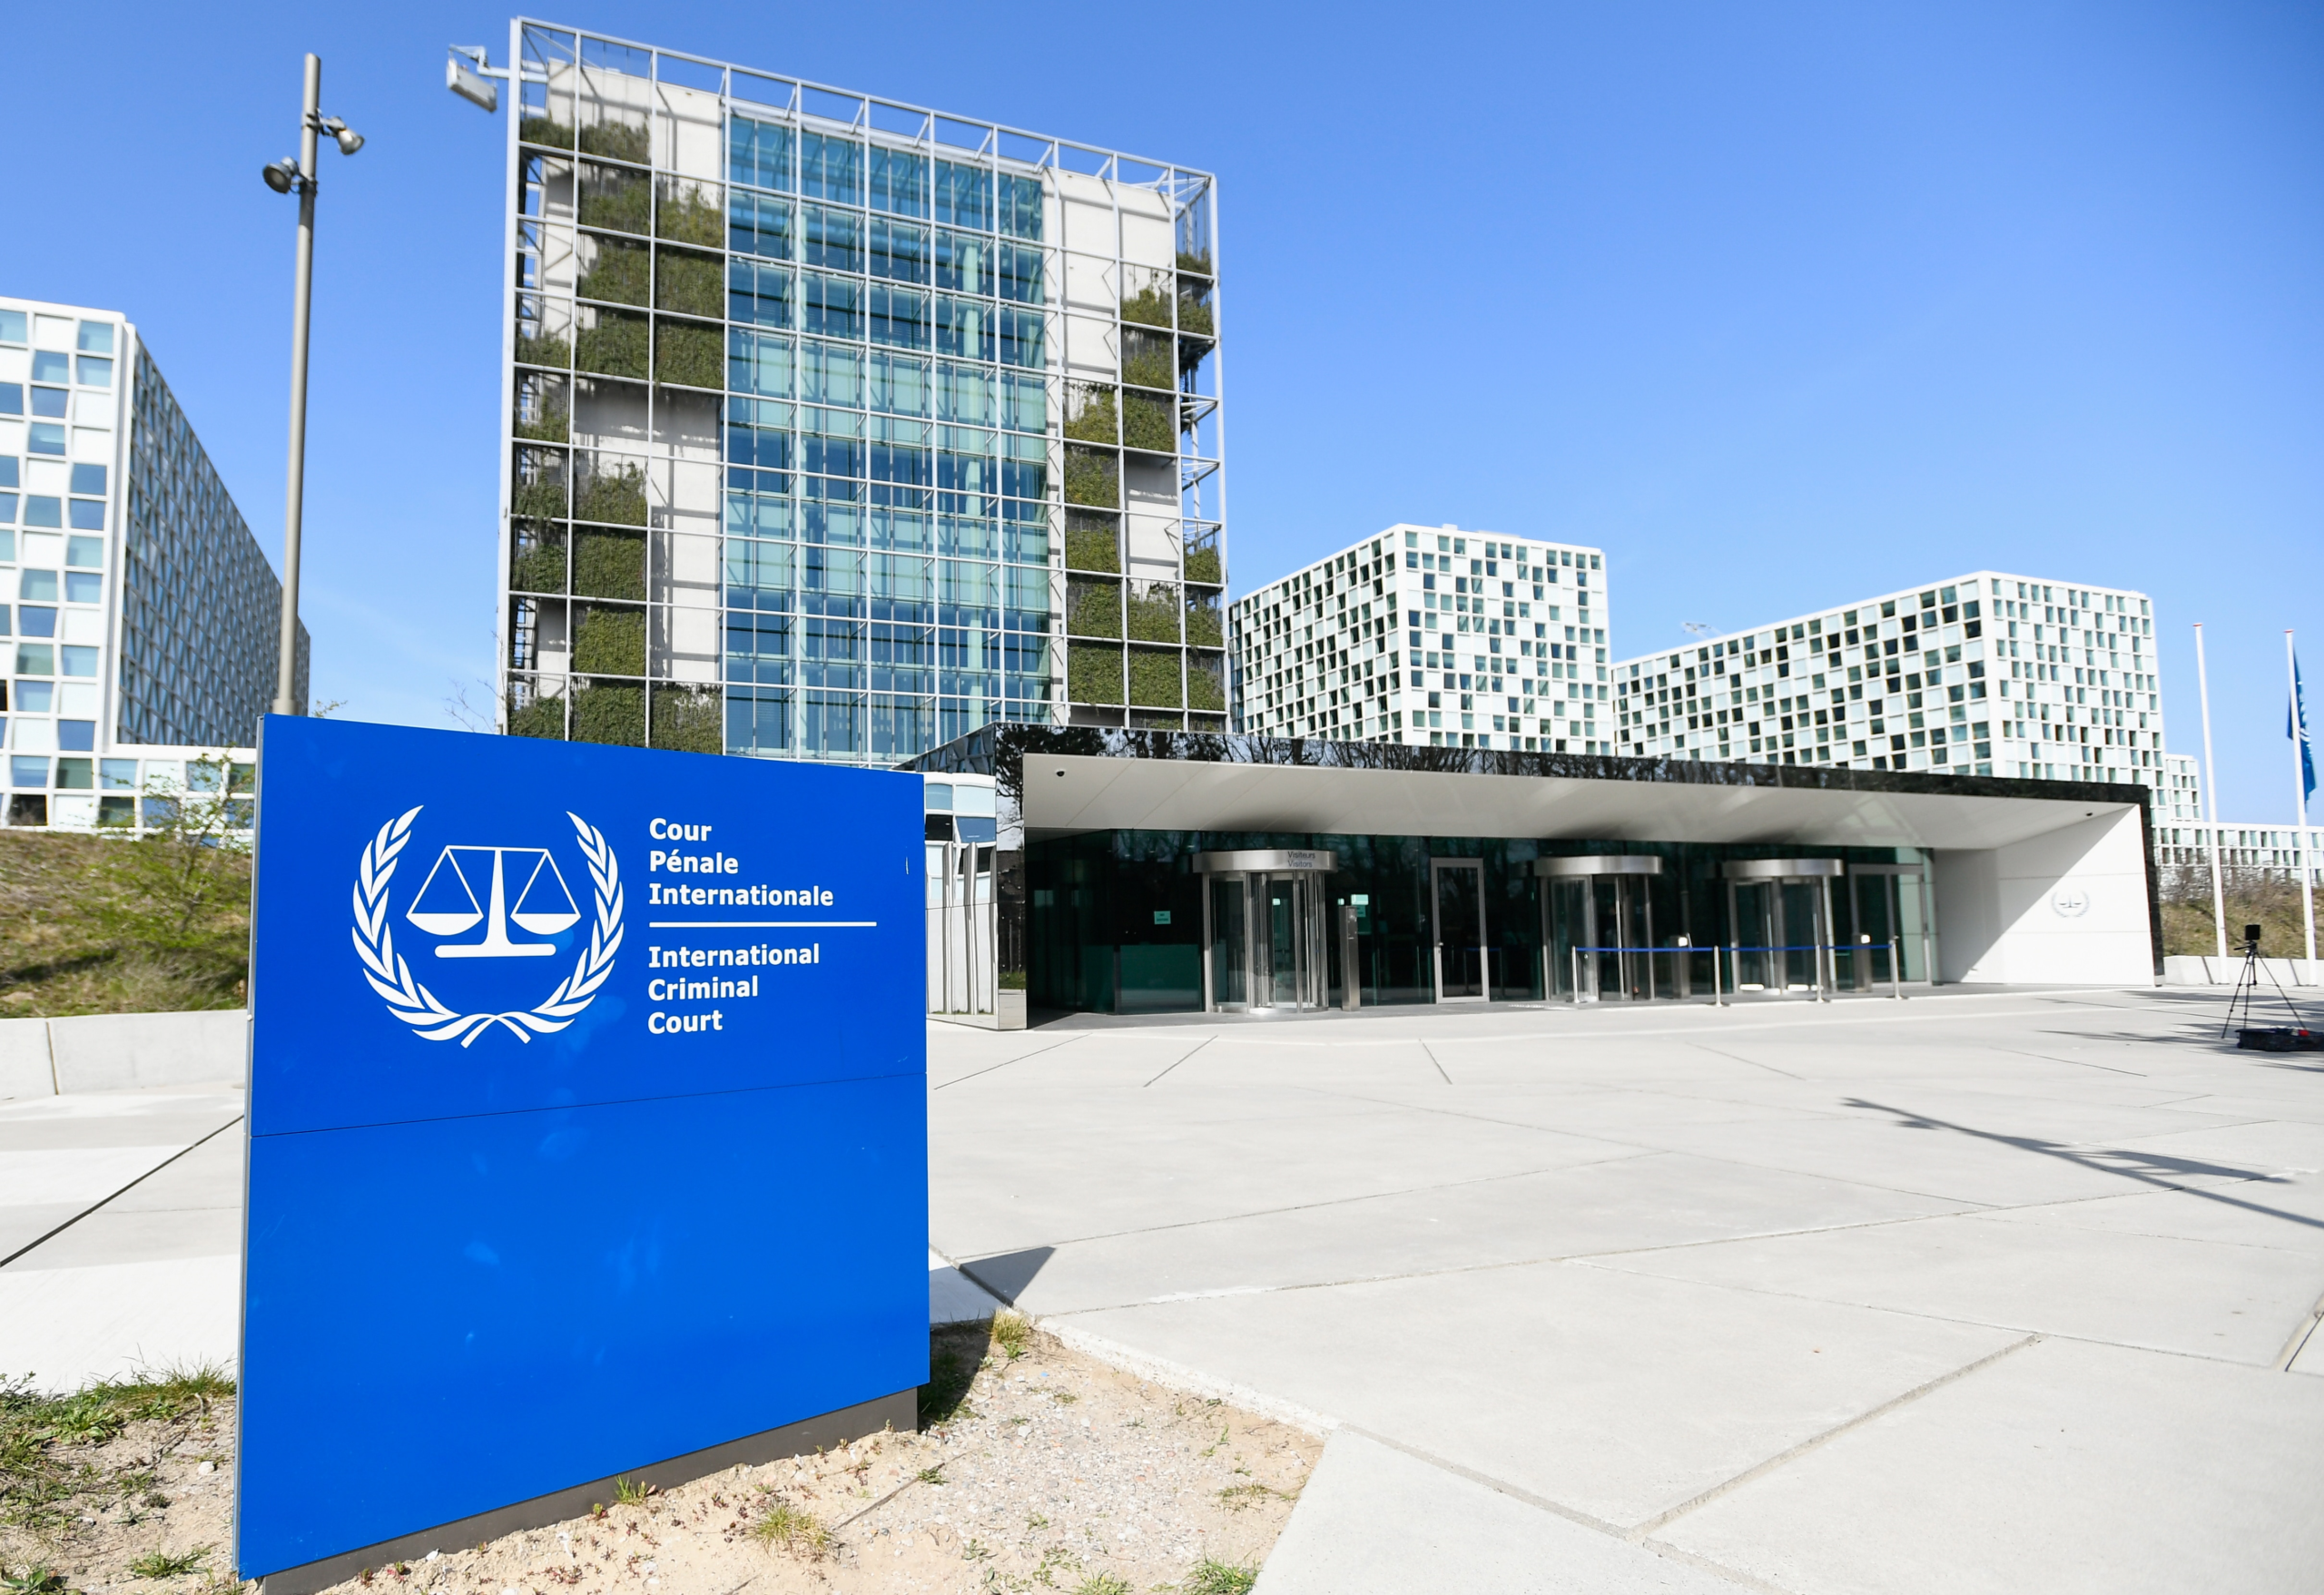 International Criminal Court, which investigates war crimes, says its been hacked - ABC News